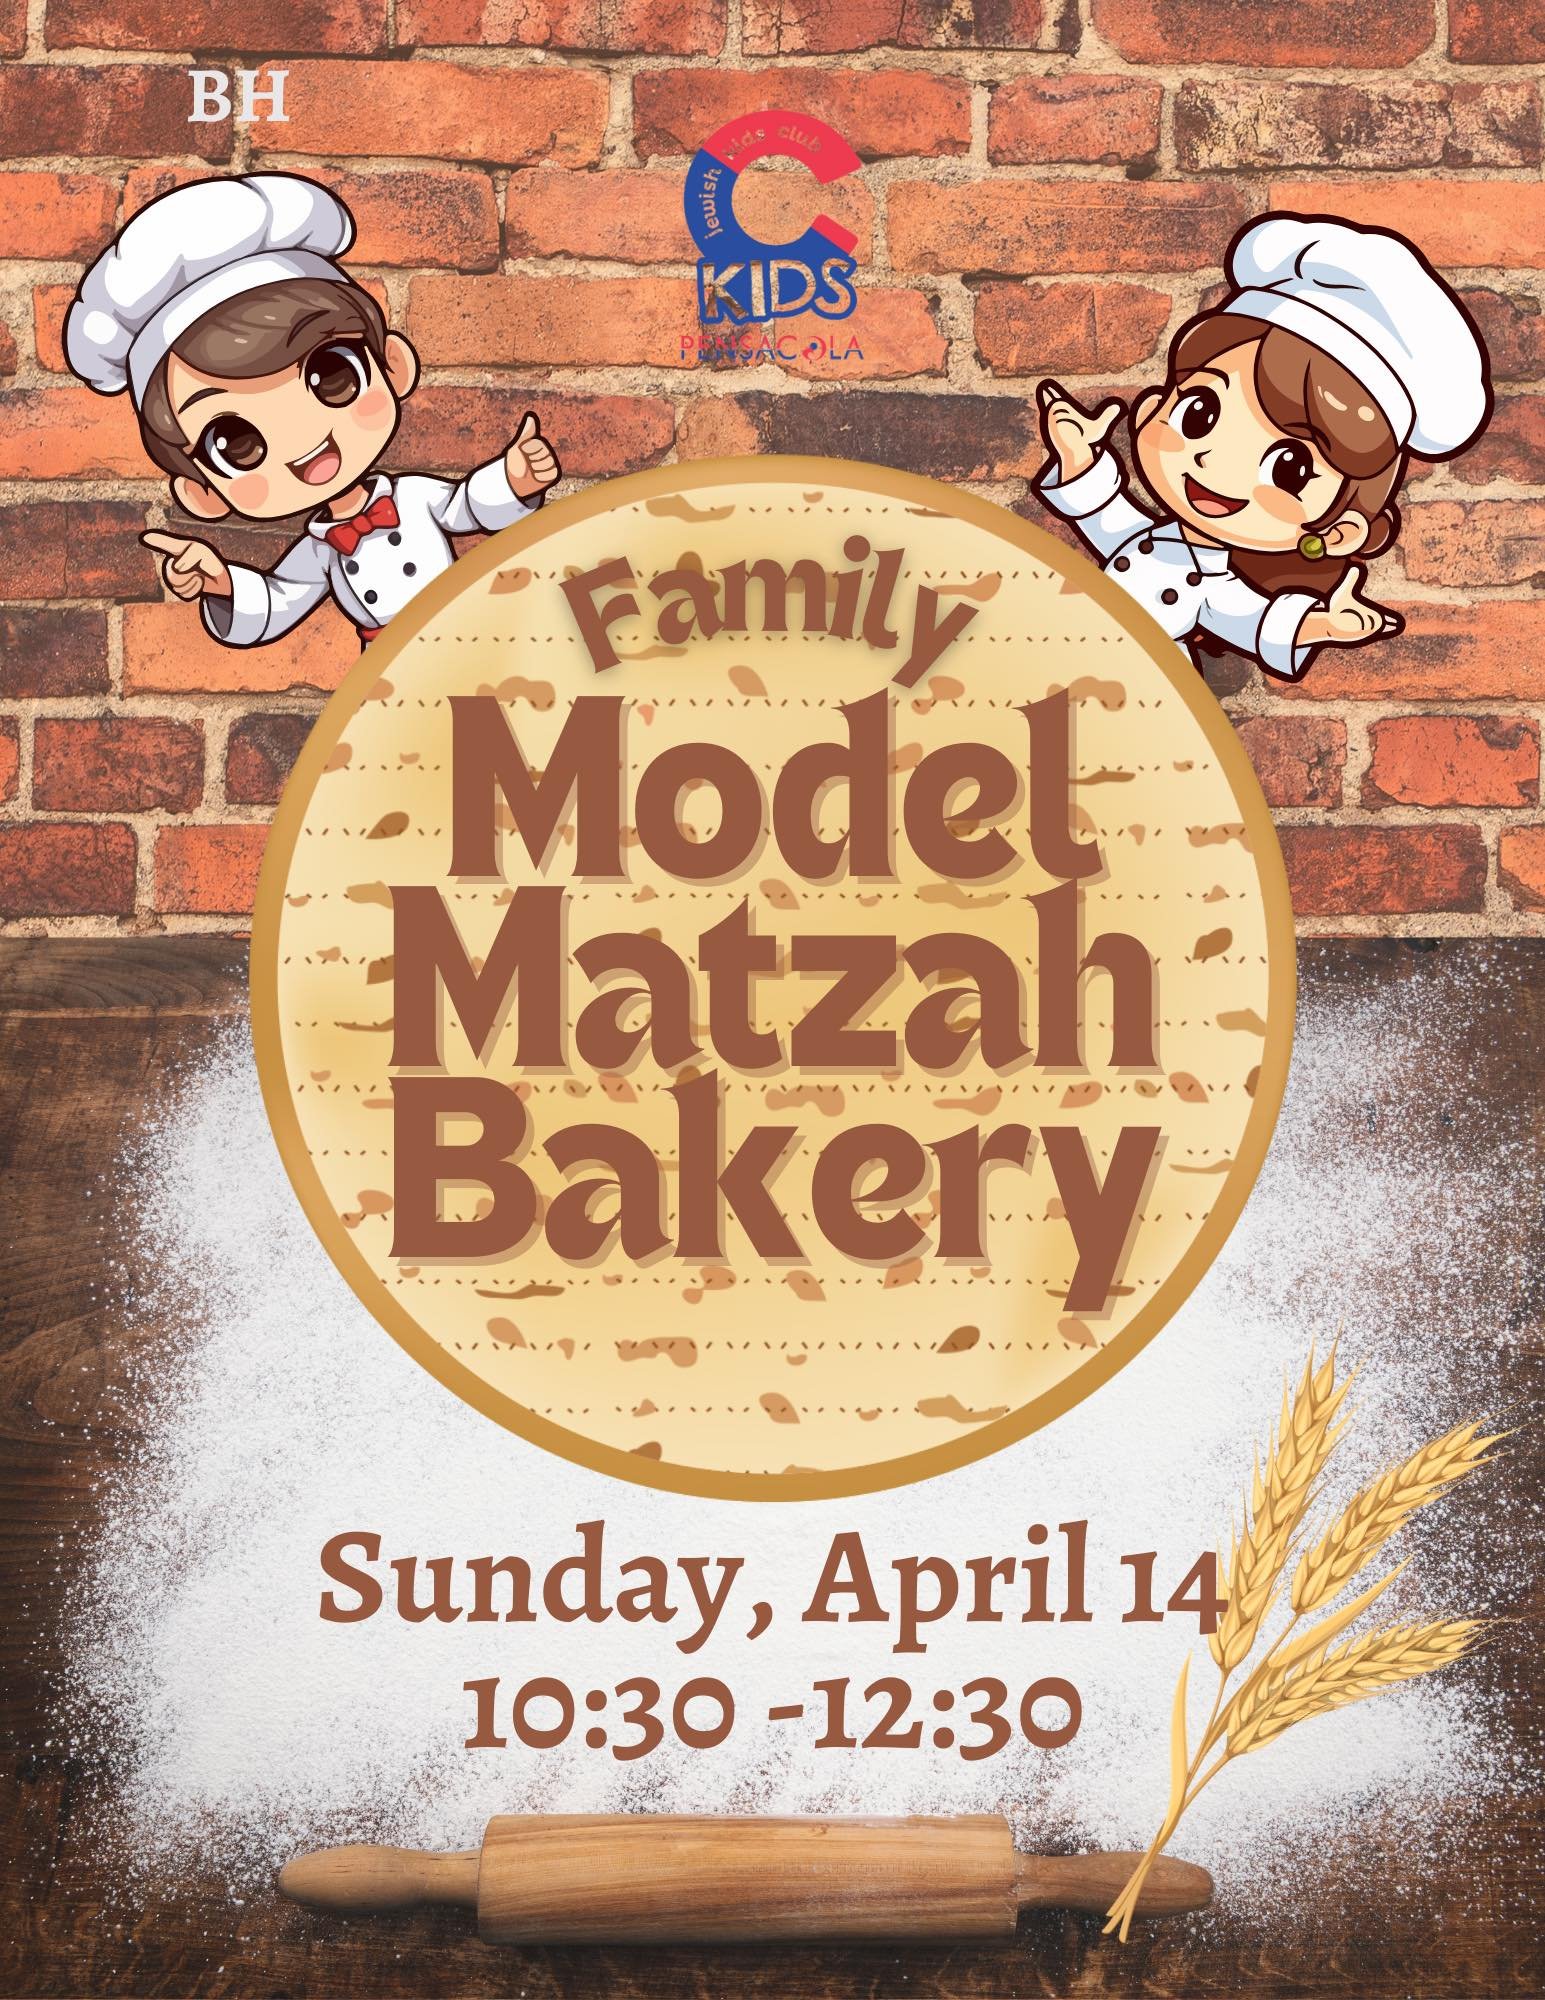 Ya&rsquo;ll, Pensacola Parents and Children! 🌟
Join us for a Family model Matzah Bakery, where you can roll, bake, and taste your very own matzah! 🍞✨
Let&rsquo;s create Jewish memories together! #FamilyFun #MatzahMaking&quot;